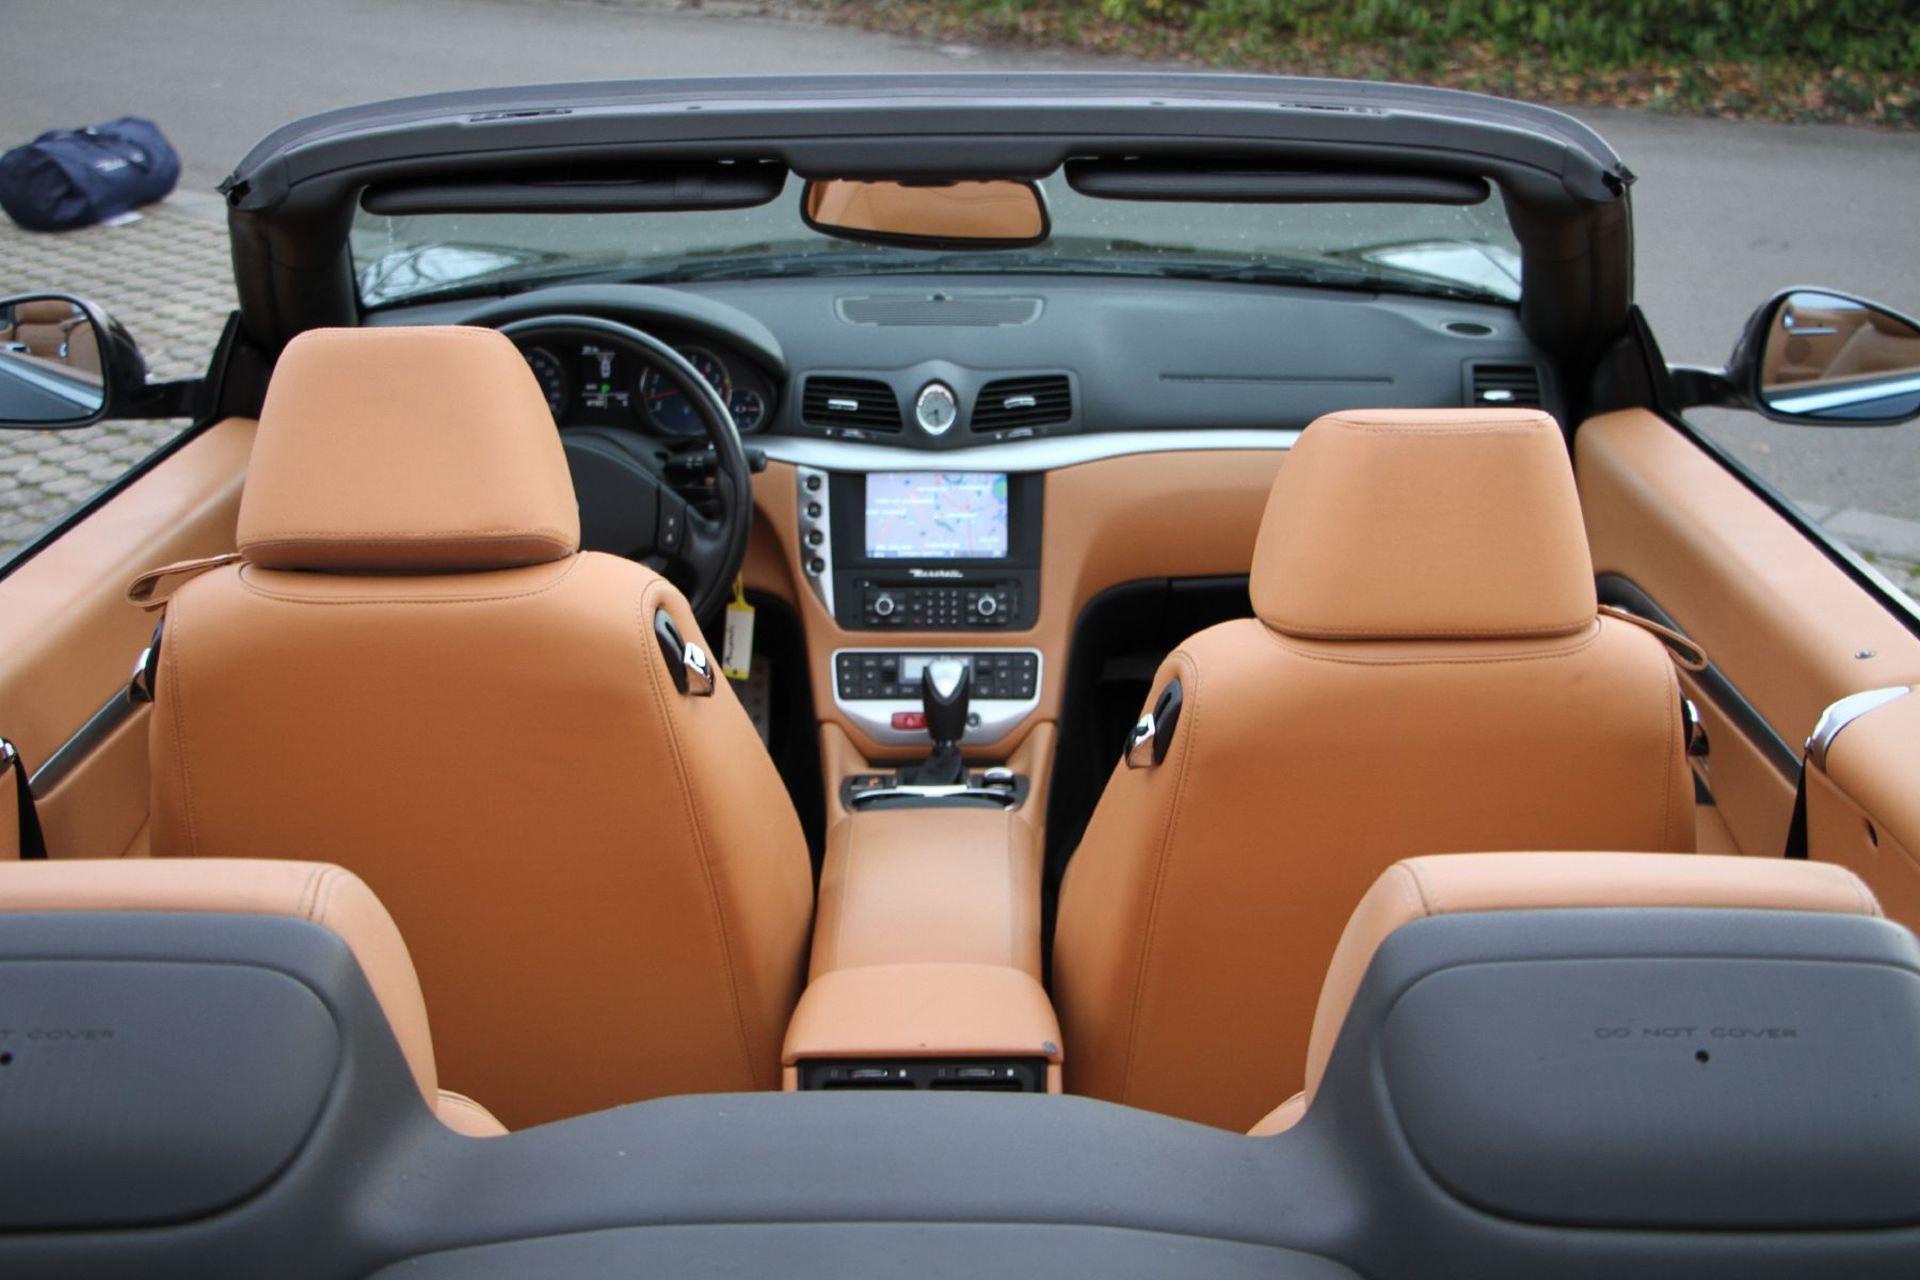 Maserati Grand Cabrio, Chassis Number: ZAMKM45B000052657, first registered 04/2010, two owners, - Bild 11 aus 15